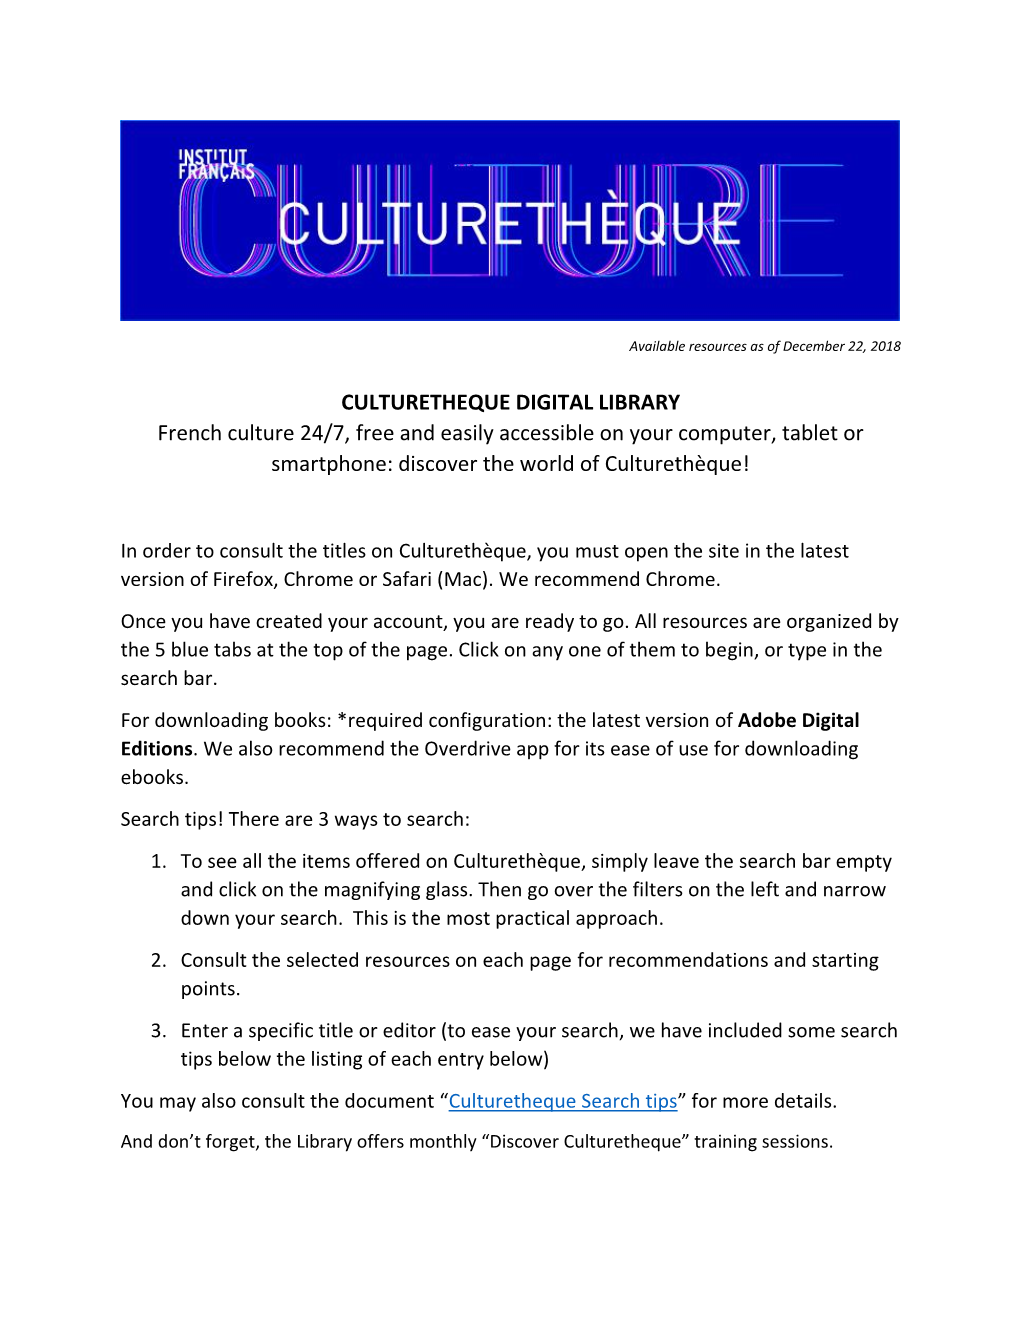 CULTURETHEQUE DIGITAL LIBRARY French Culture 24/7, Free and Easily Accessible on Your Computer, Tablet Or Smartphone: Discover the World of Culturethèque!